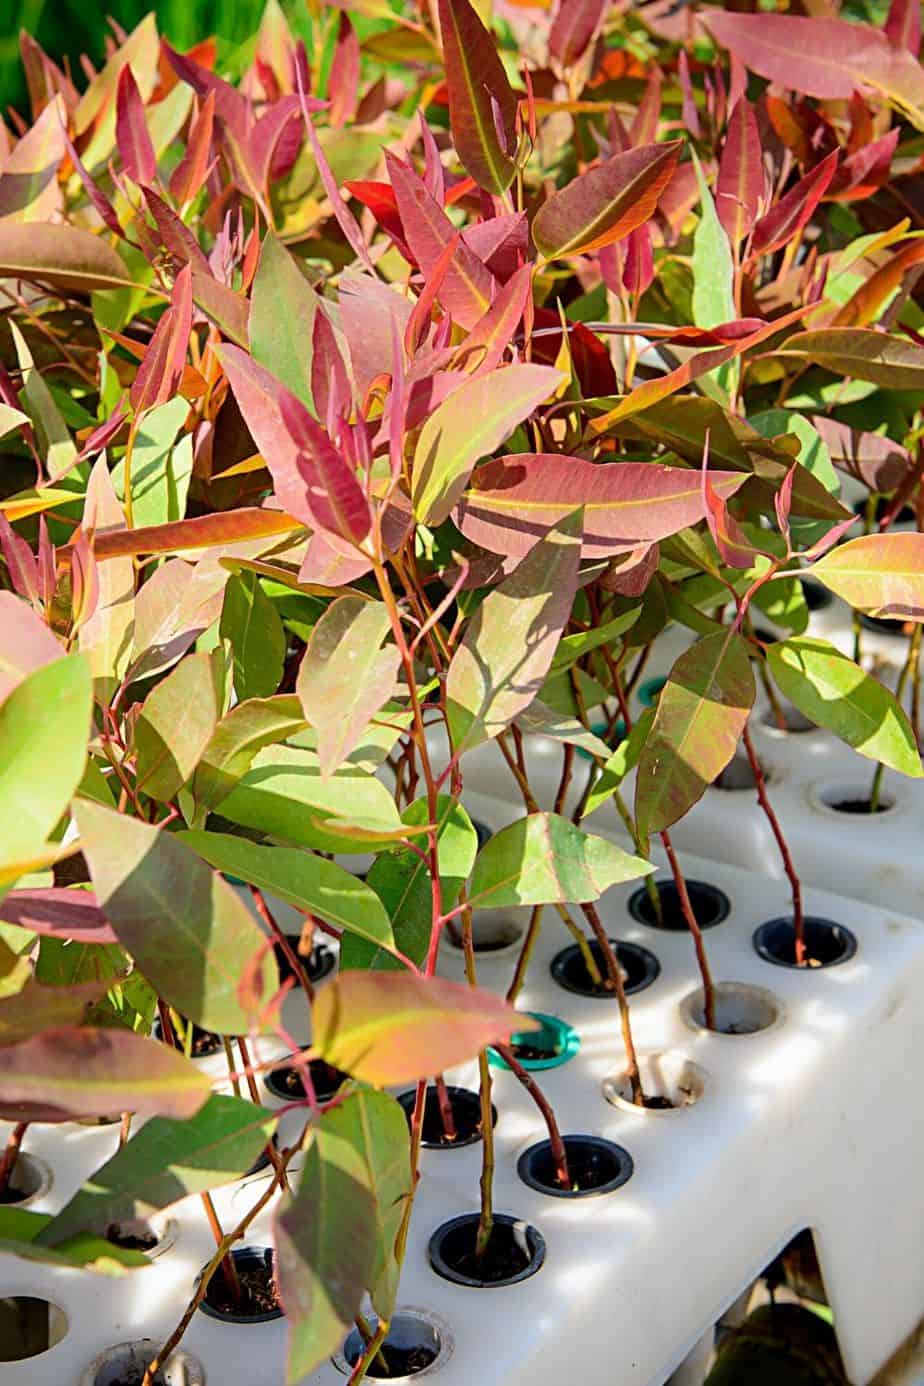 Sow the eucalyptus seeds in small pots with extra soil and place it on a heat mat or in a mini greenhouse